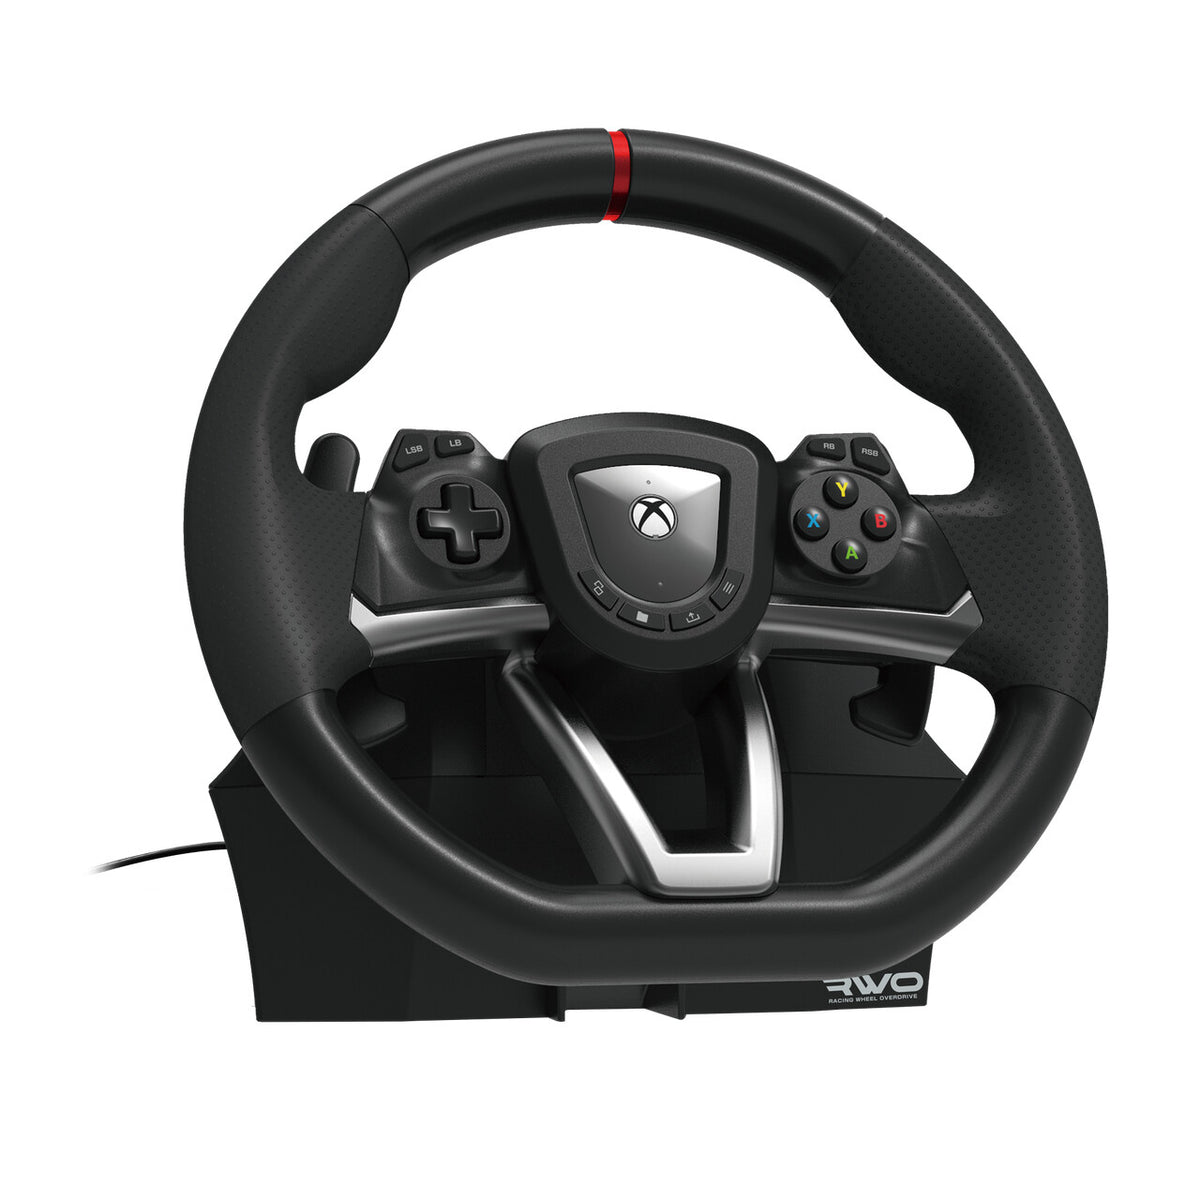 Hori Racing Wheel Overdrive - Steering Wheel Controller for PC / Xbox Series S|X